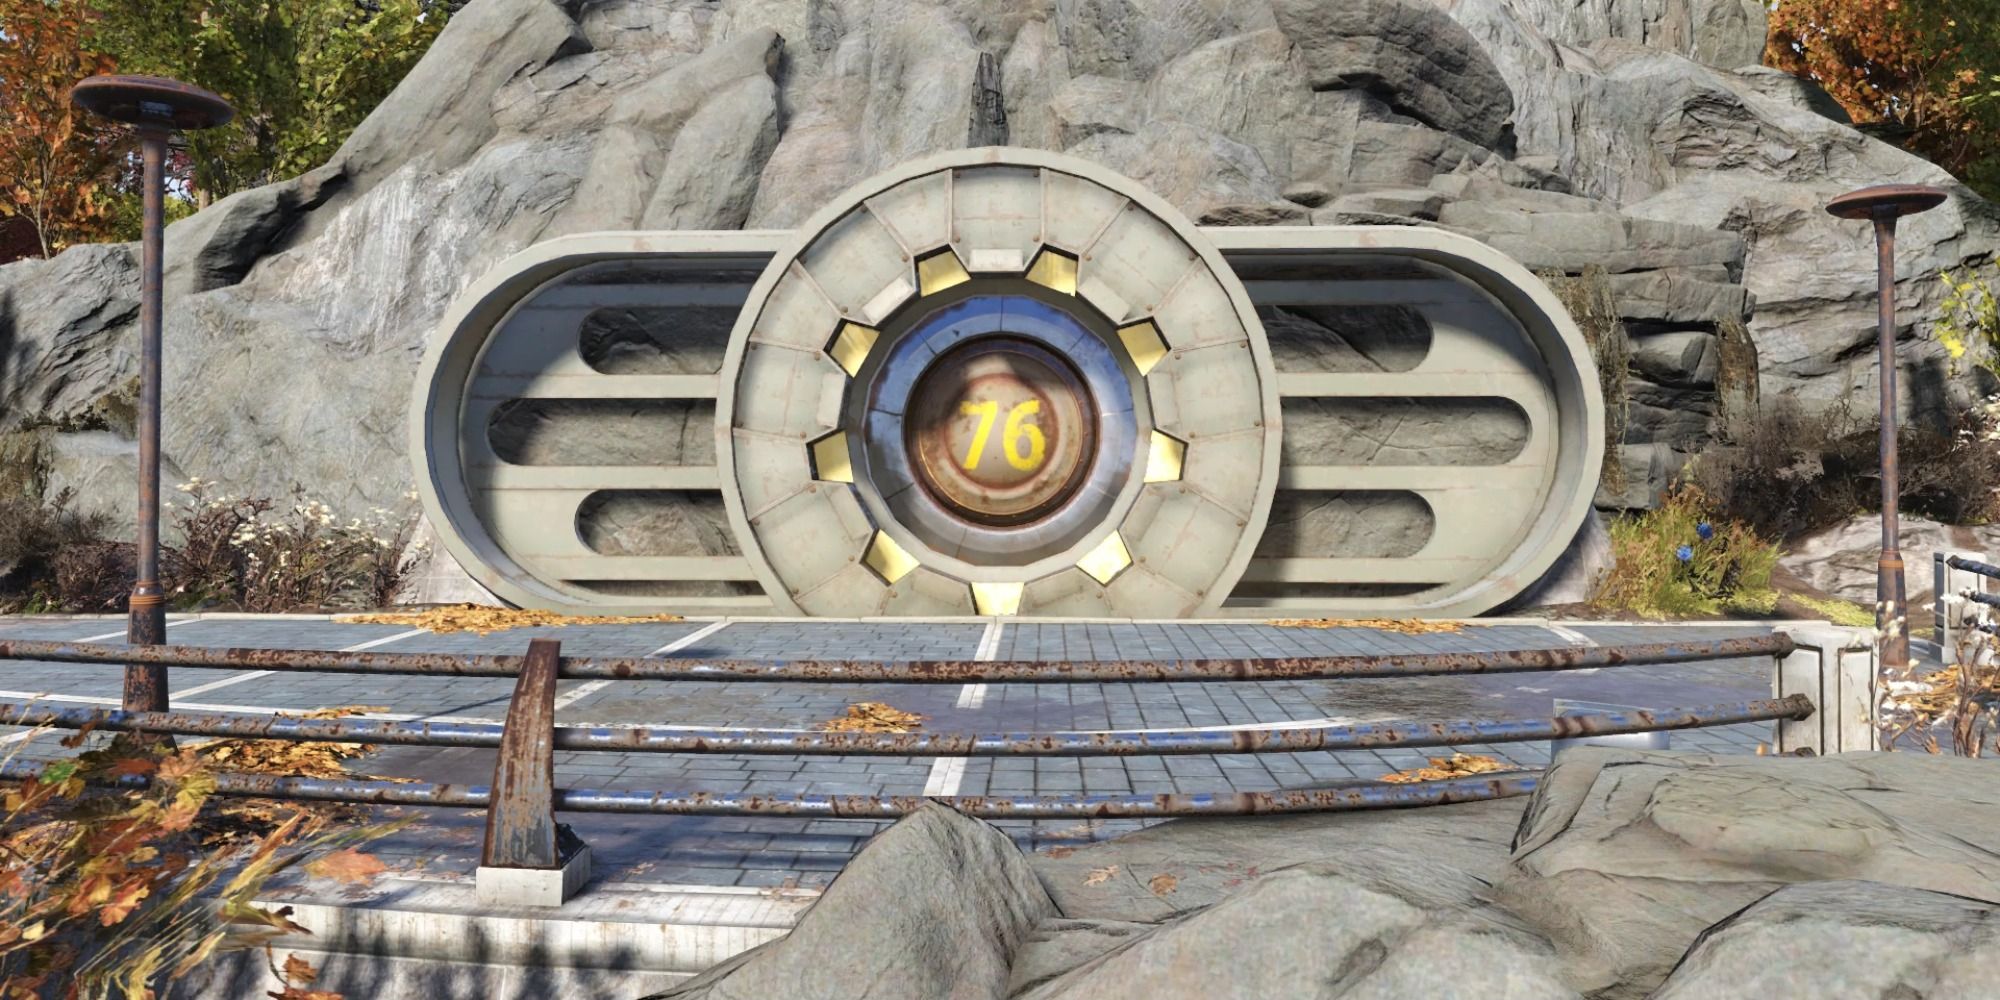 Vault 76 front entrance with railing ahead of it